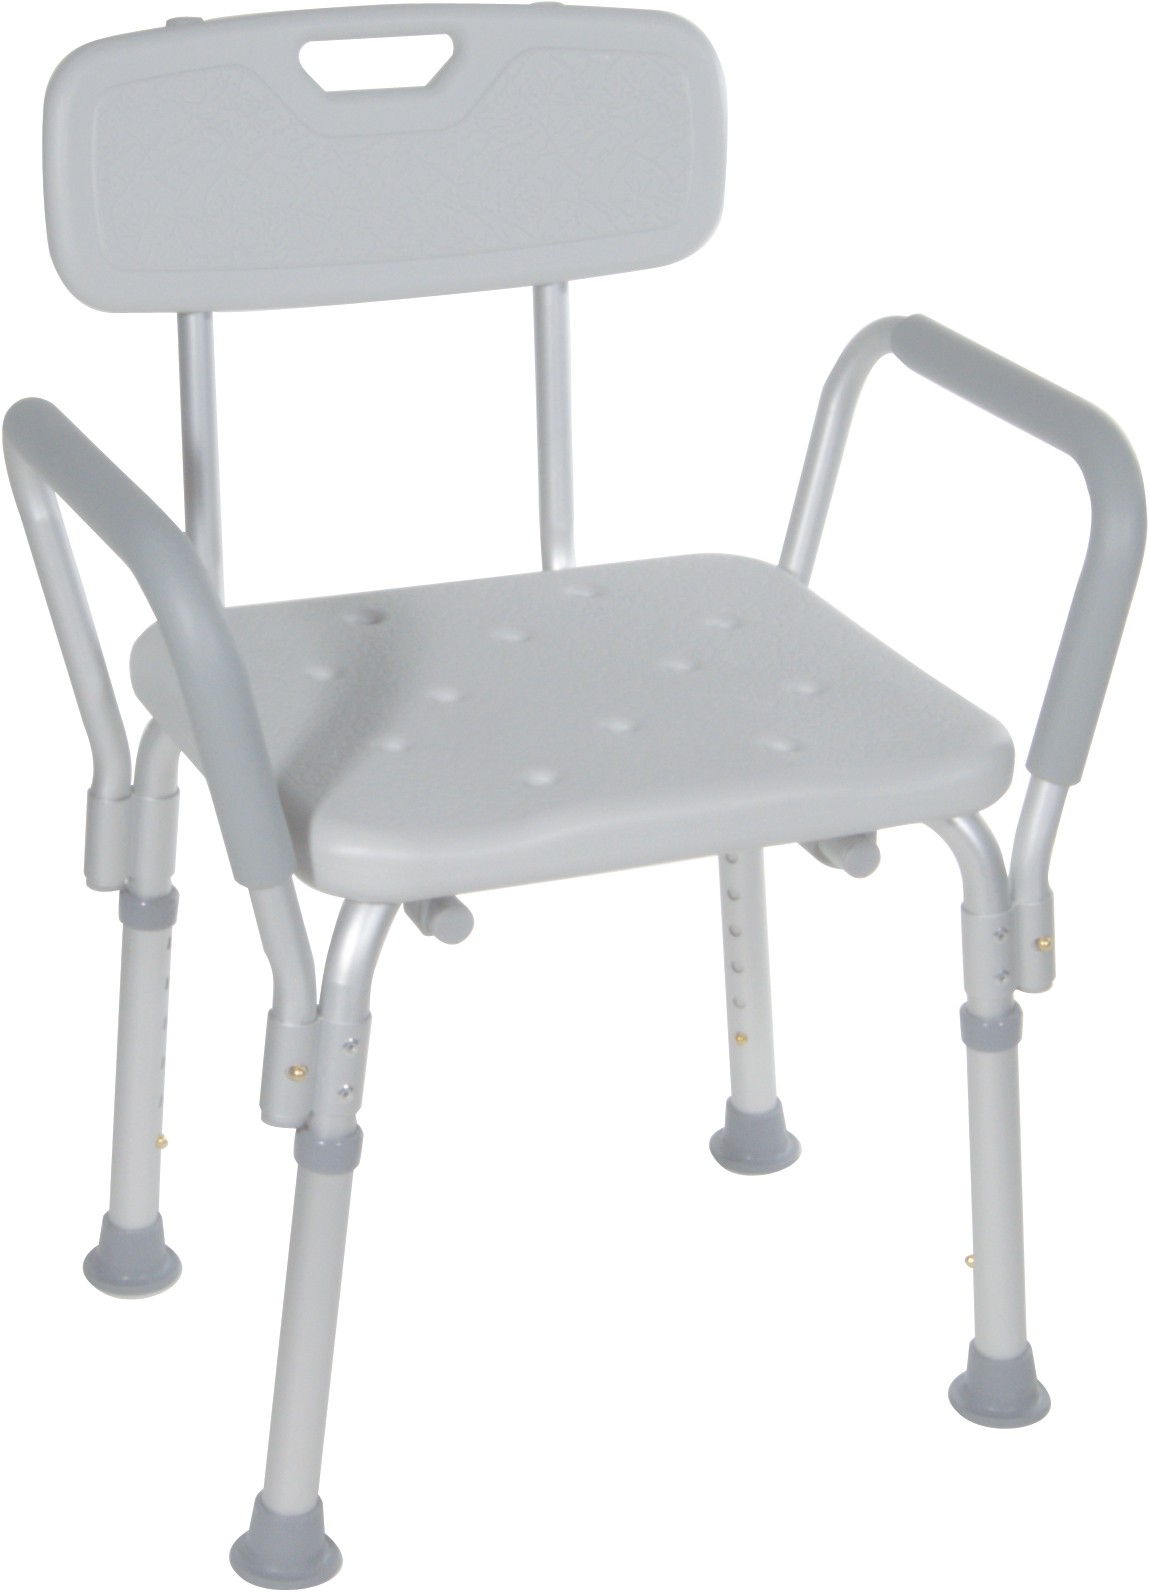 Shower Seat With Arms Off 65